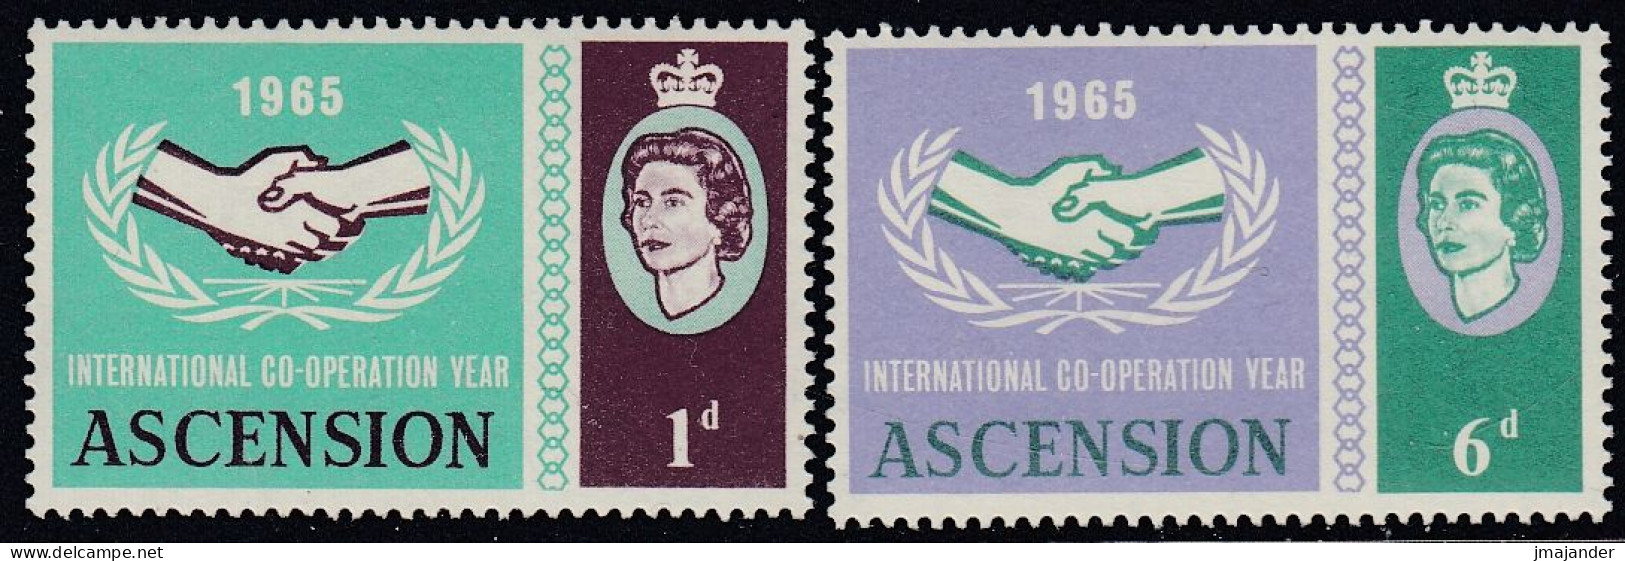 Ascension 1965 - International Co-operation Year - Mi 94-95 ** MNH - Ascension